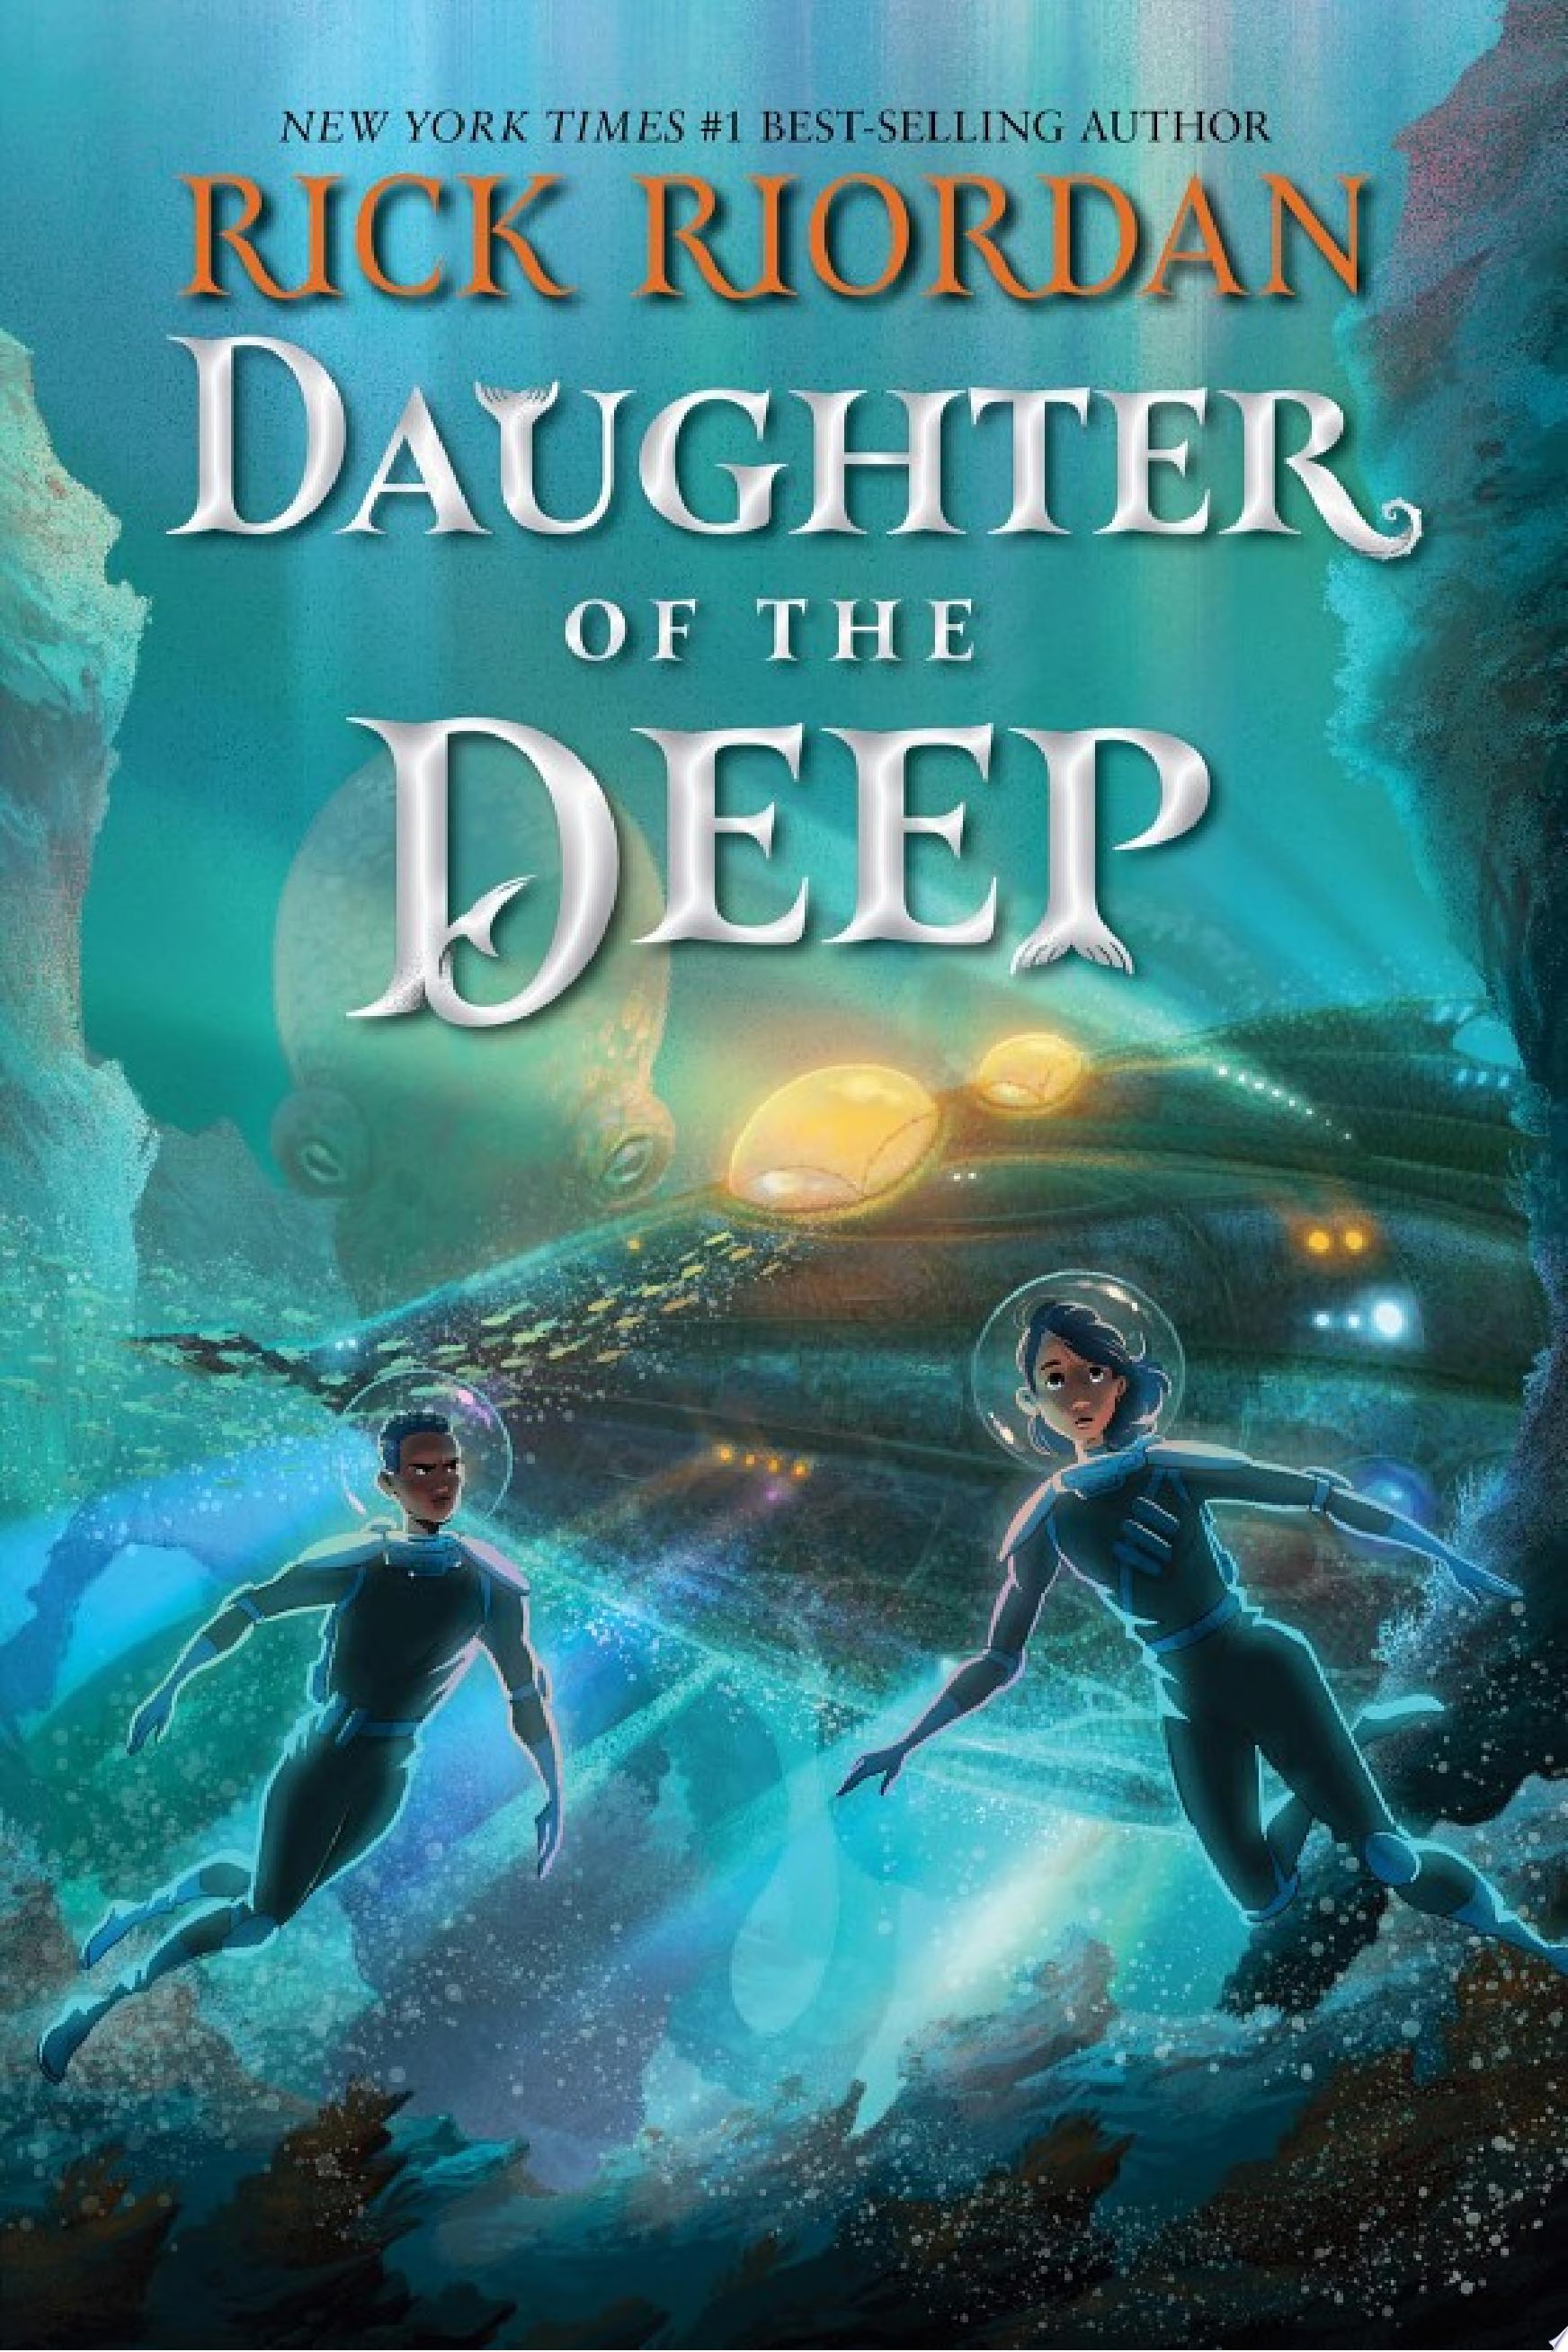 Image for "Daughter of the Deep"